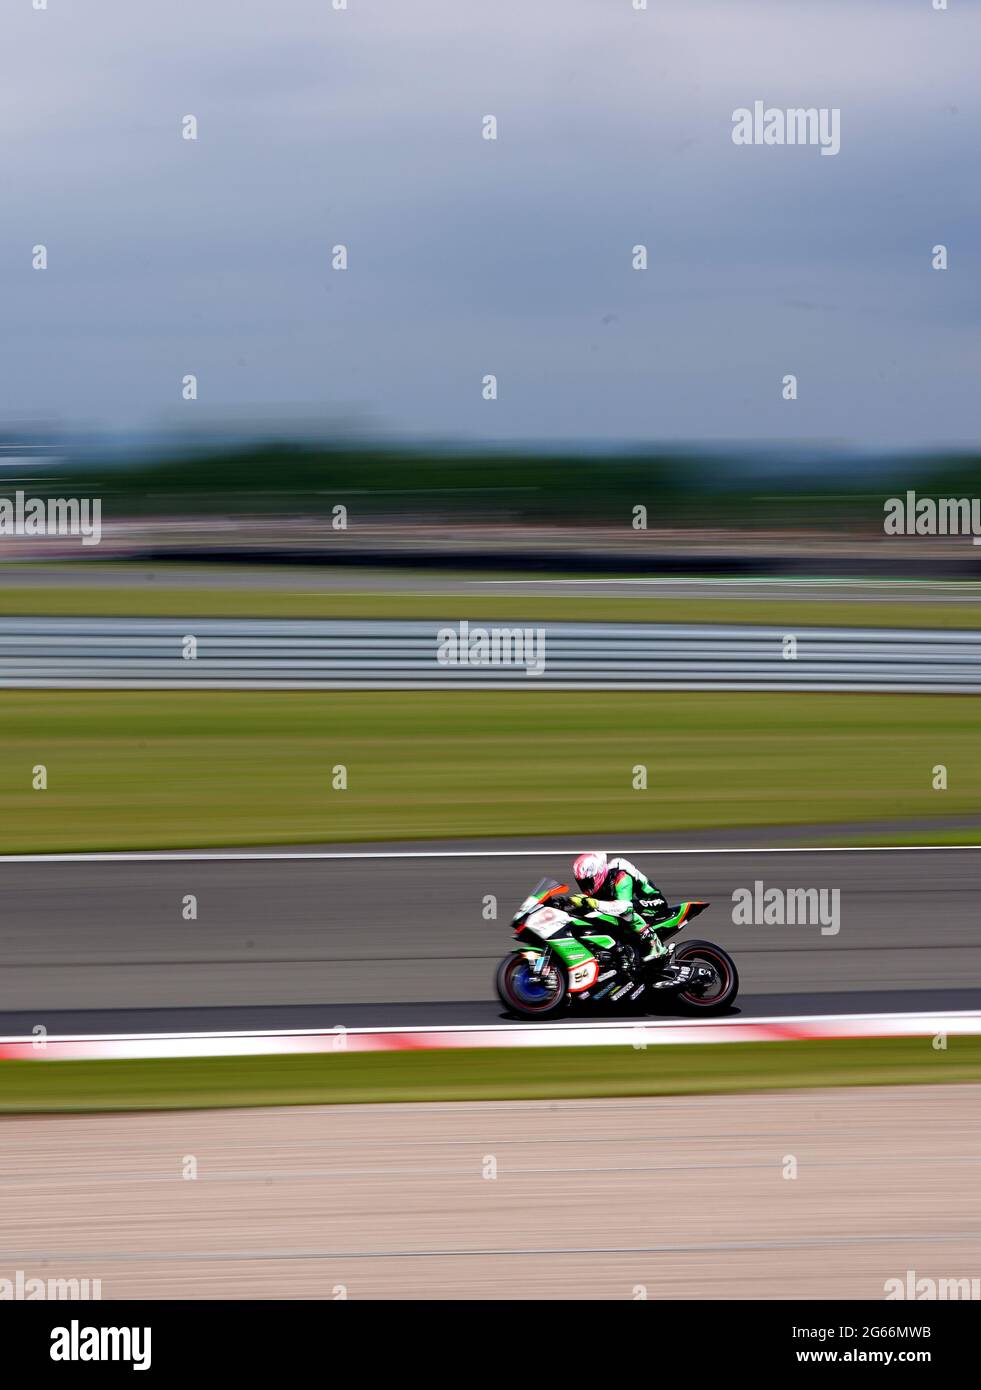 OUTDO TPR Team Pedercini Racing's Loris Cresson during the WorldSBK Race 1 on day one of the Motul Fim Superbike Championship 2021 at Donington Park, Leicestershire. Saturday July 3, 2021. Stock Photo